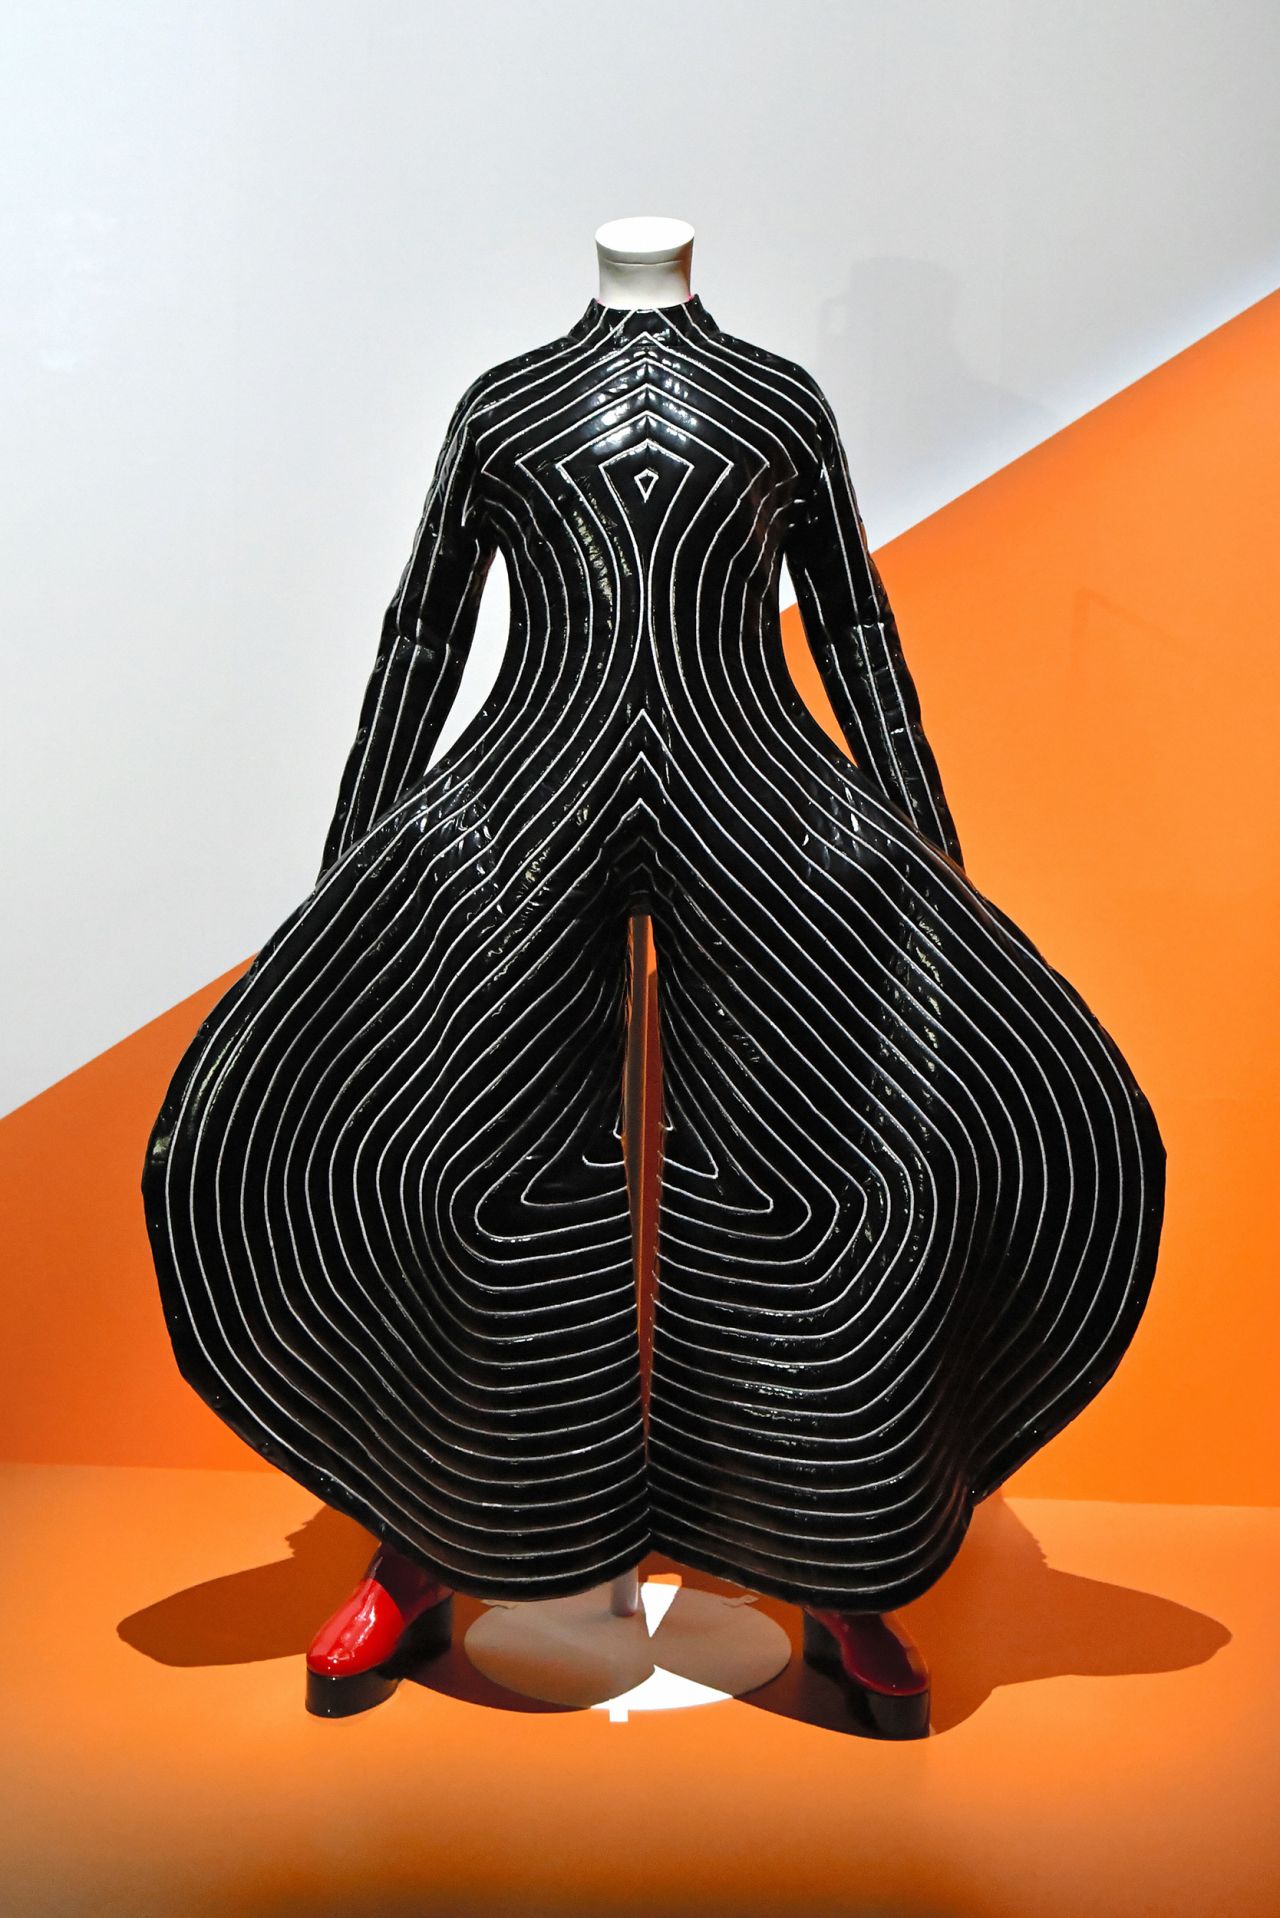 A costume created by  Yamamoto for David Bowie is displayed during the press preview of the "David Bowie is" exhibition at Warehouse Terrada on January 5, 2017 in Tokyo, Japan. 